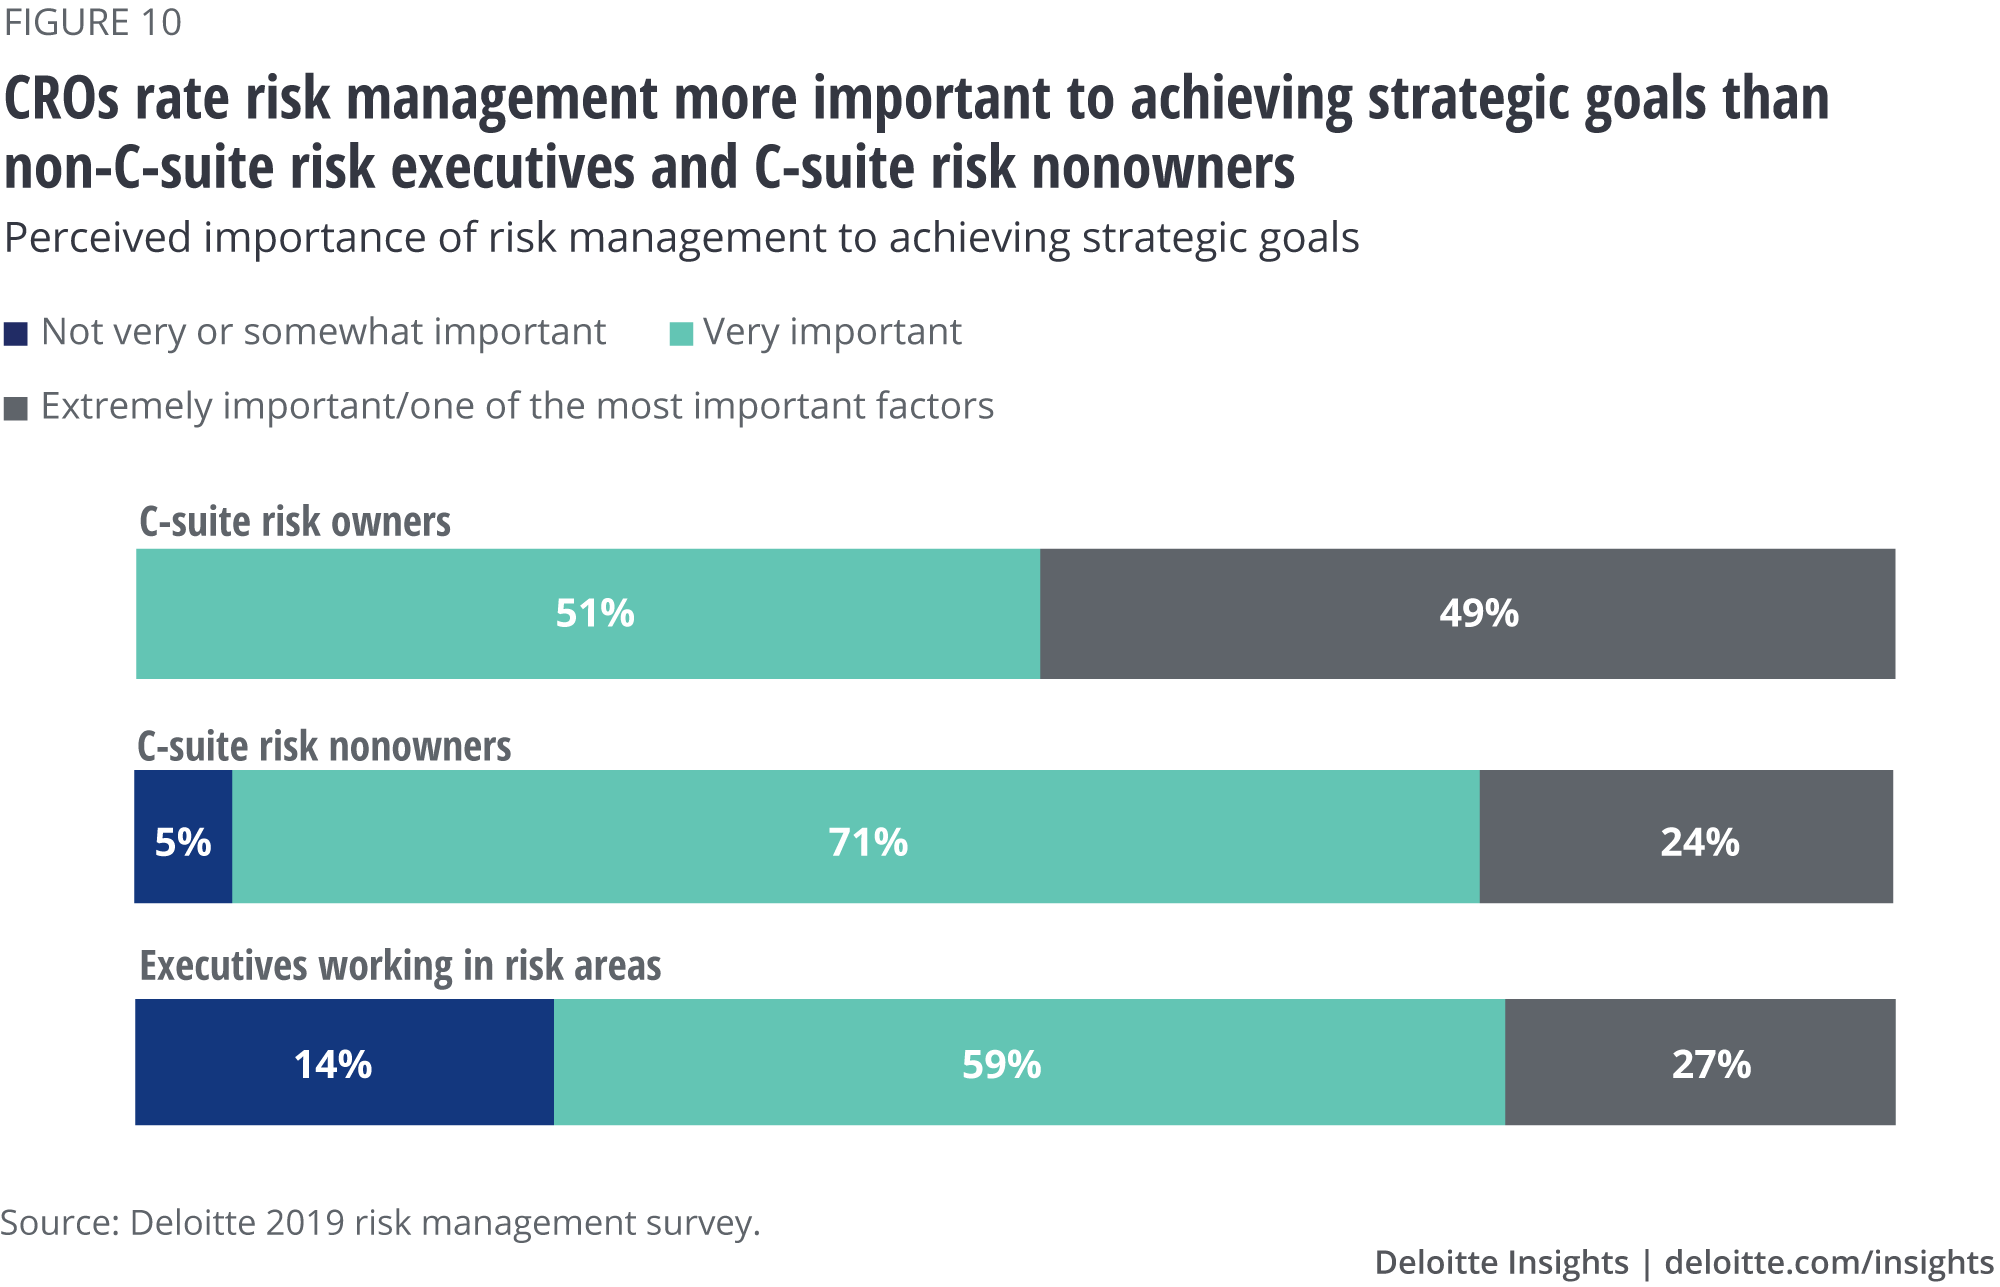 CROs rate risk management more important to achieving strategic goals than non-C-suite risk executives and C-suite risk nonowners